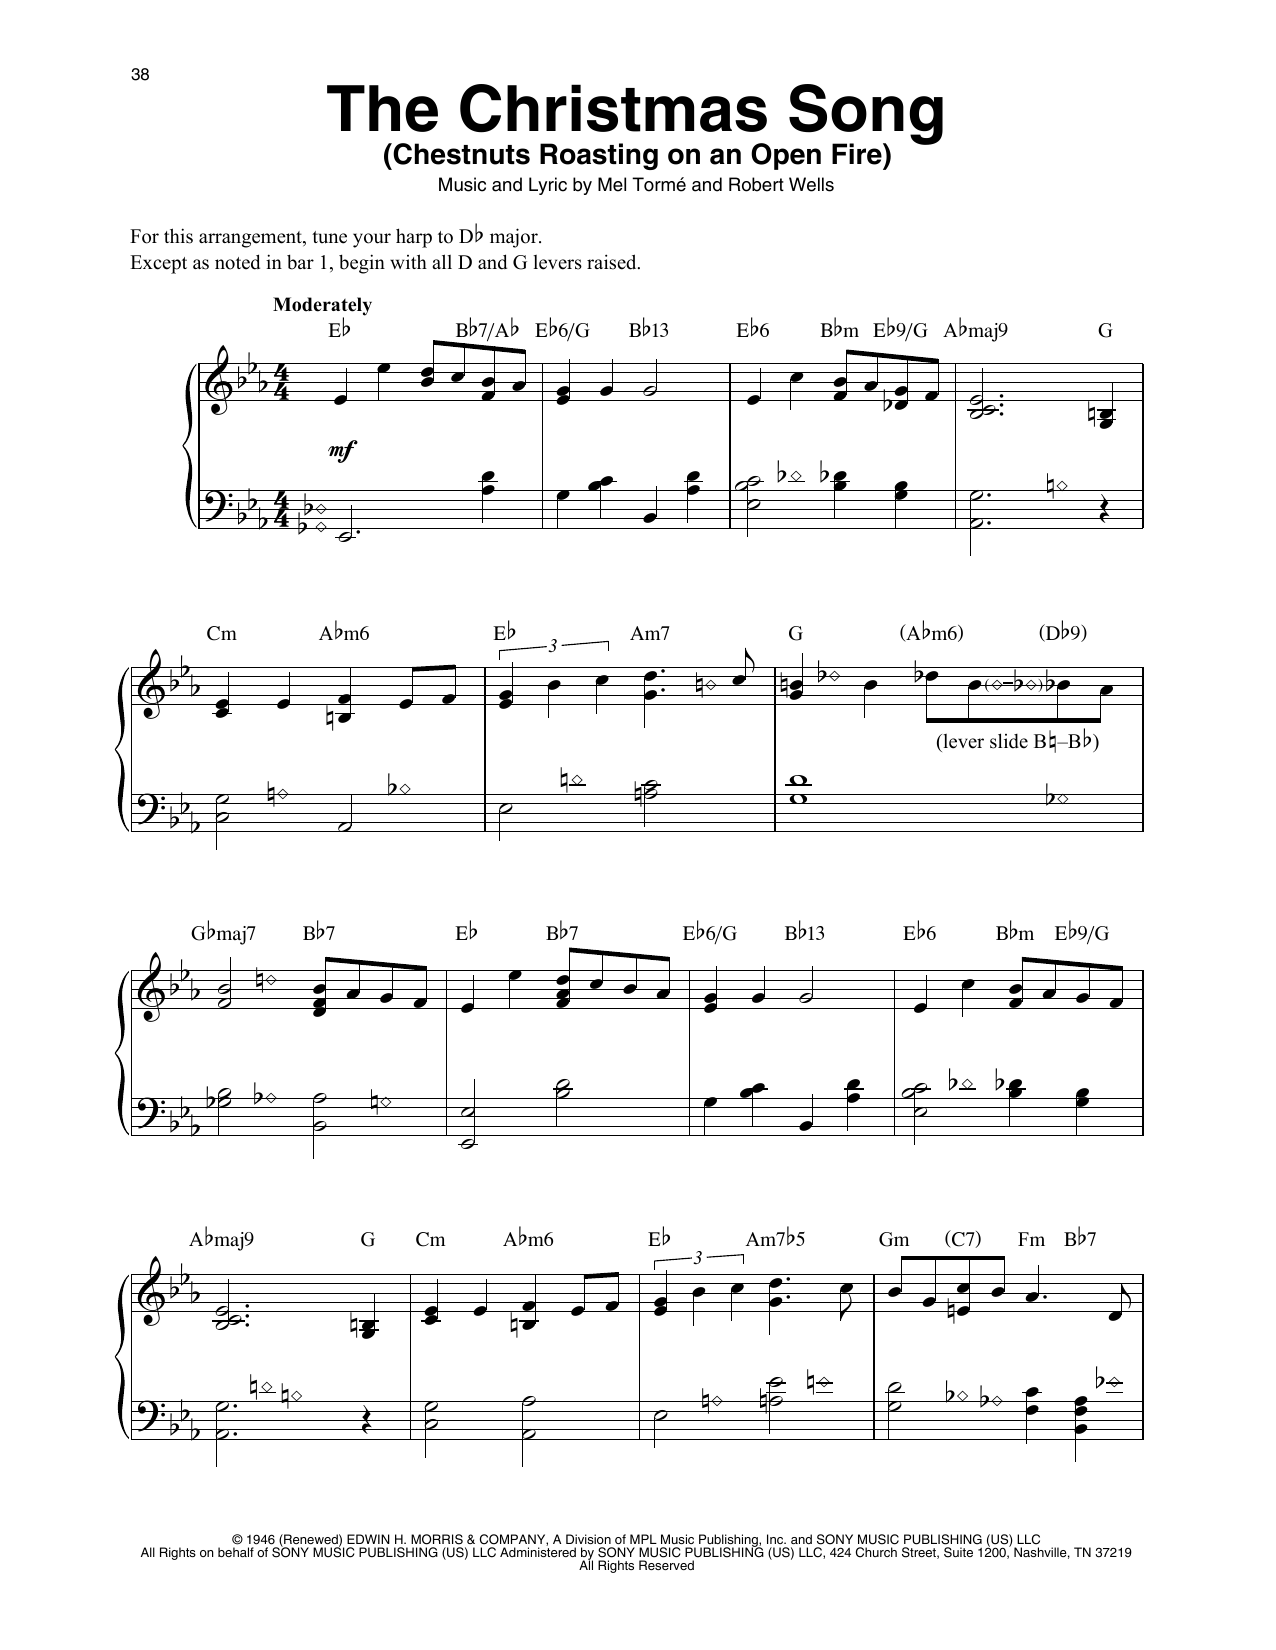 Mel Torme The Christmas Song (Chestnuts Roasting On An Open Fire) (arr. Maeve Gilchrist) sheet music notes printable PDF score